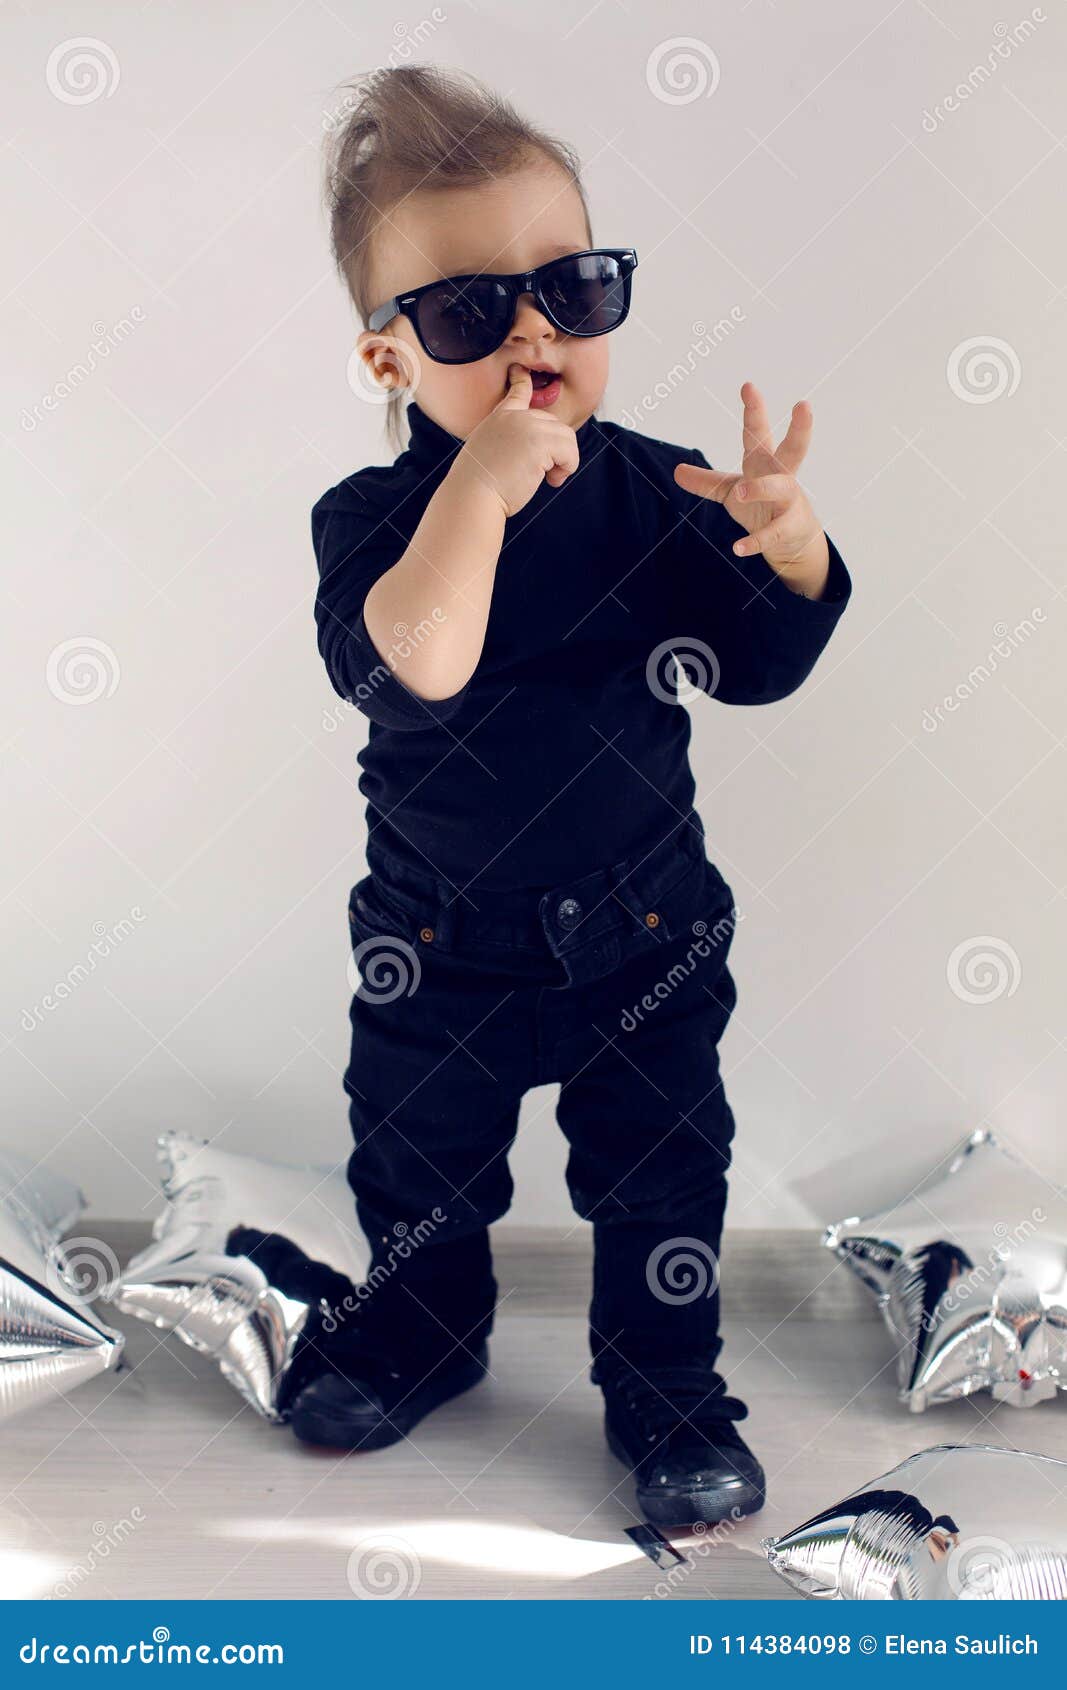 Stylish Baby Boy in Black Rocker Clothes and Sunglasses Stock ...